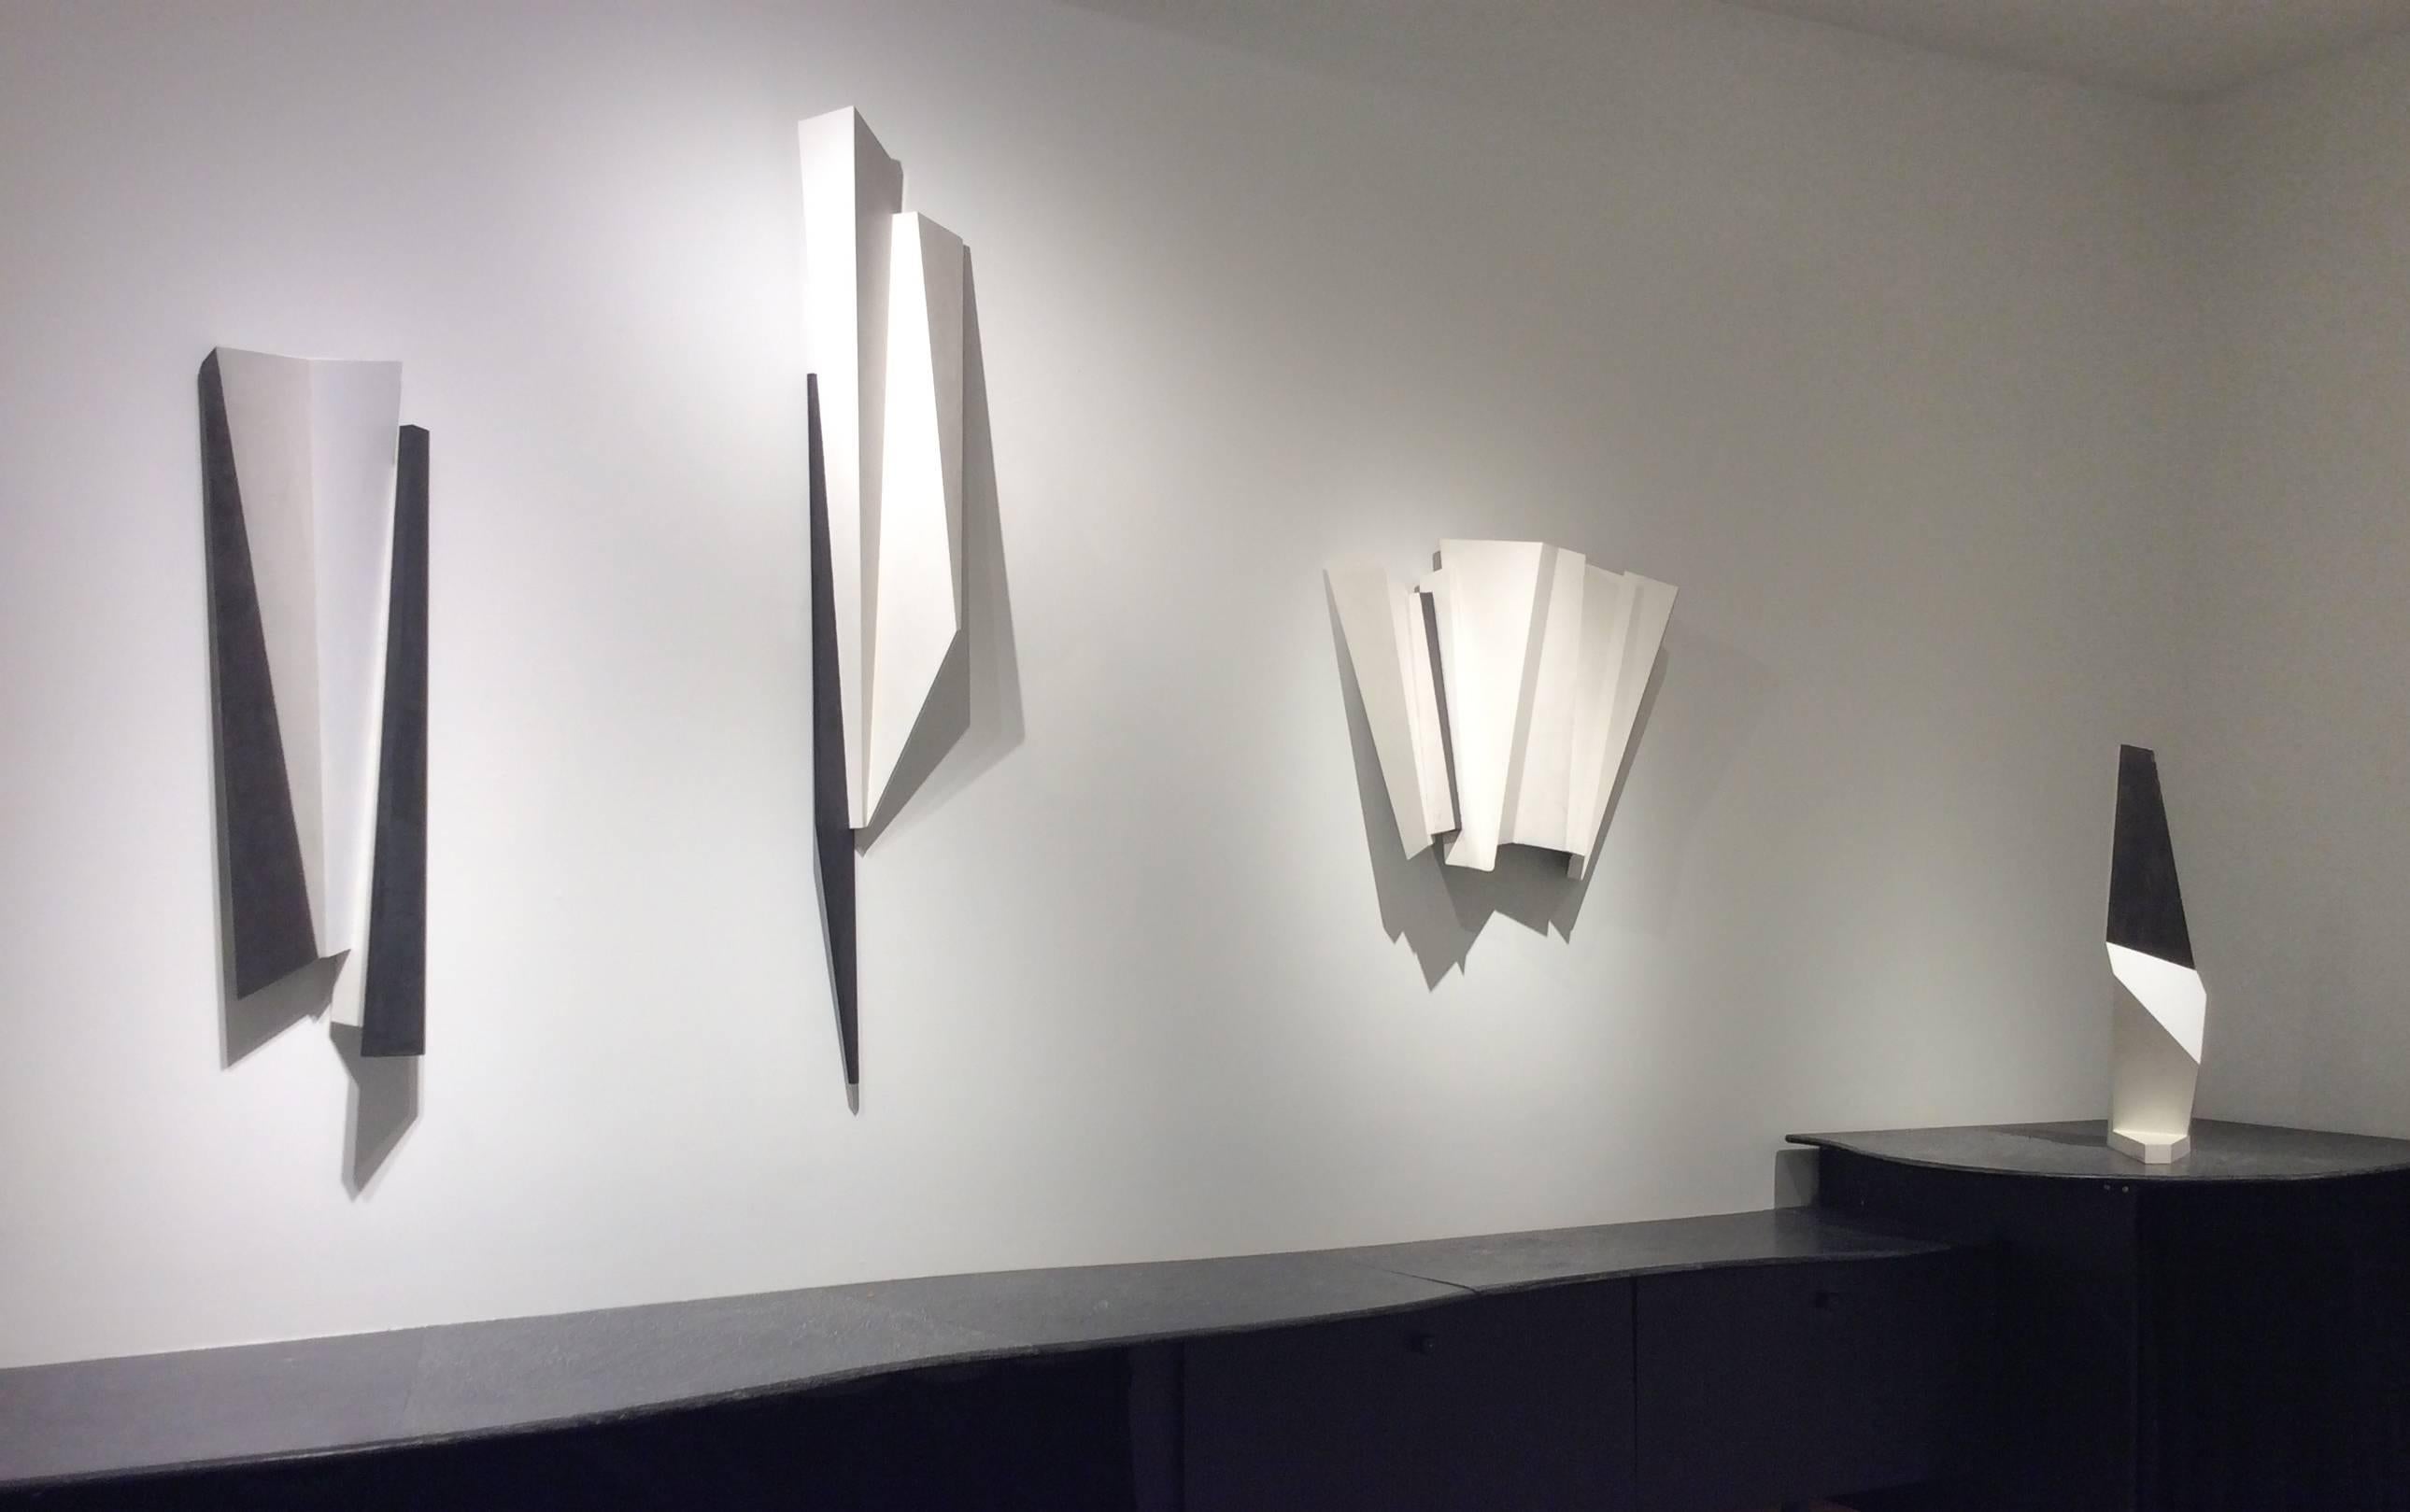 66 x 12 x 6 inches
carved precision board & Venetian plaster 

This contemporary, abstract minimalist wall sculpture was made by Japanese artist, Dai Ban in 2017. The elegant minimalist wall sculpture is incredibly lightweight and has a thin surface